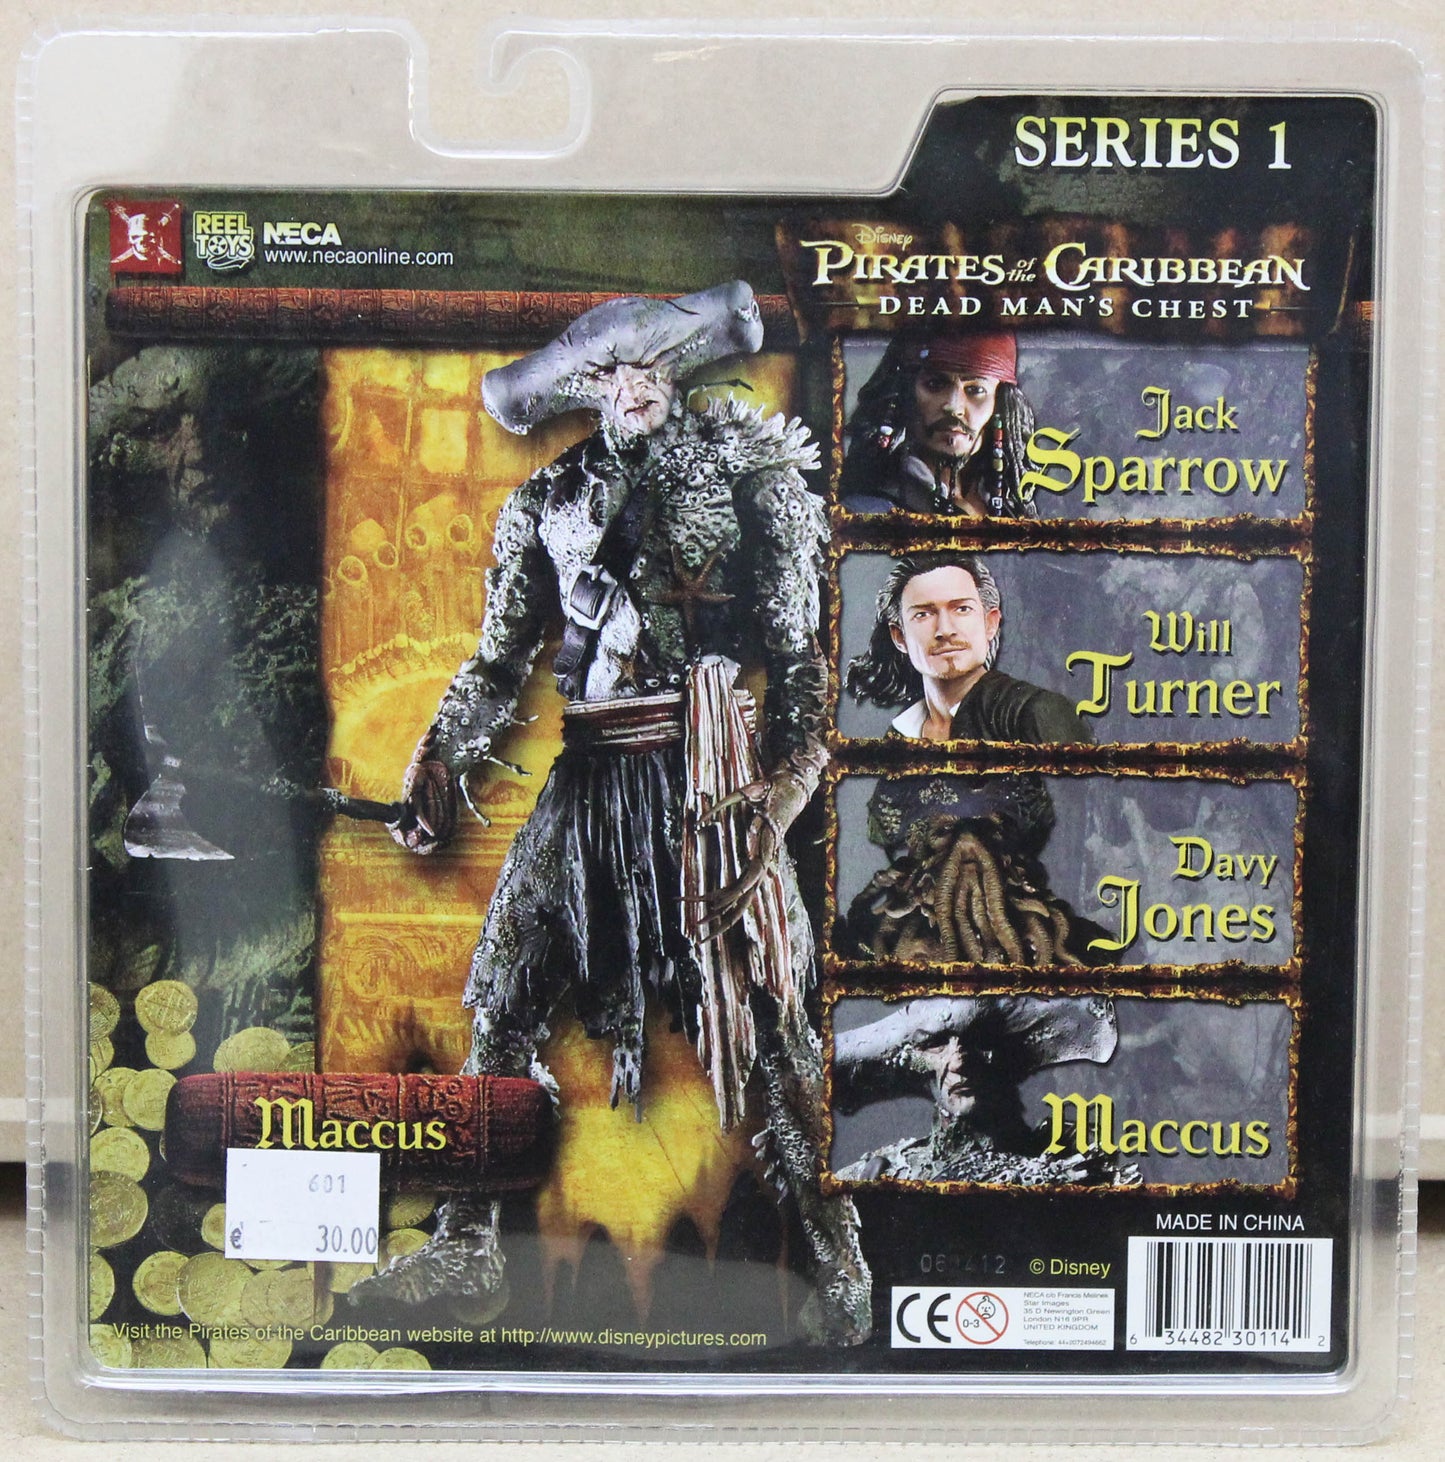 Pirates of the Caribbean Action Figure - Maccus